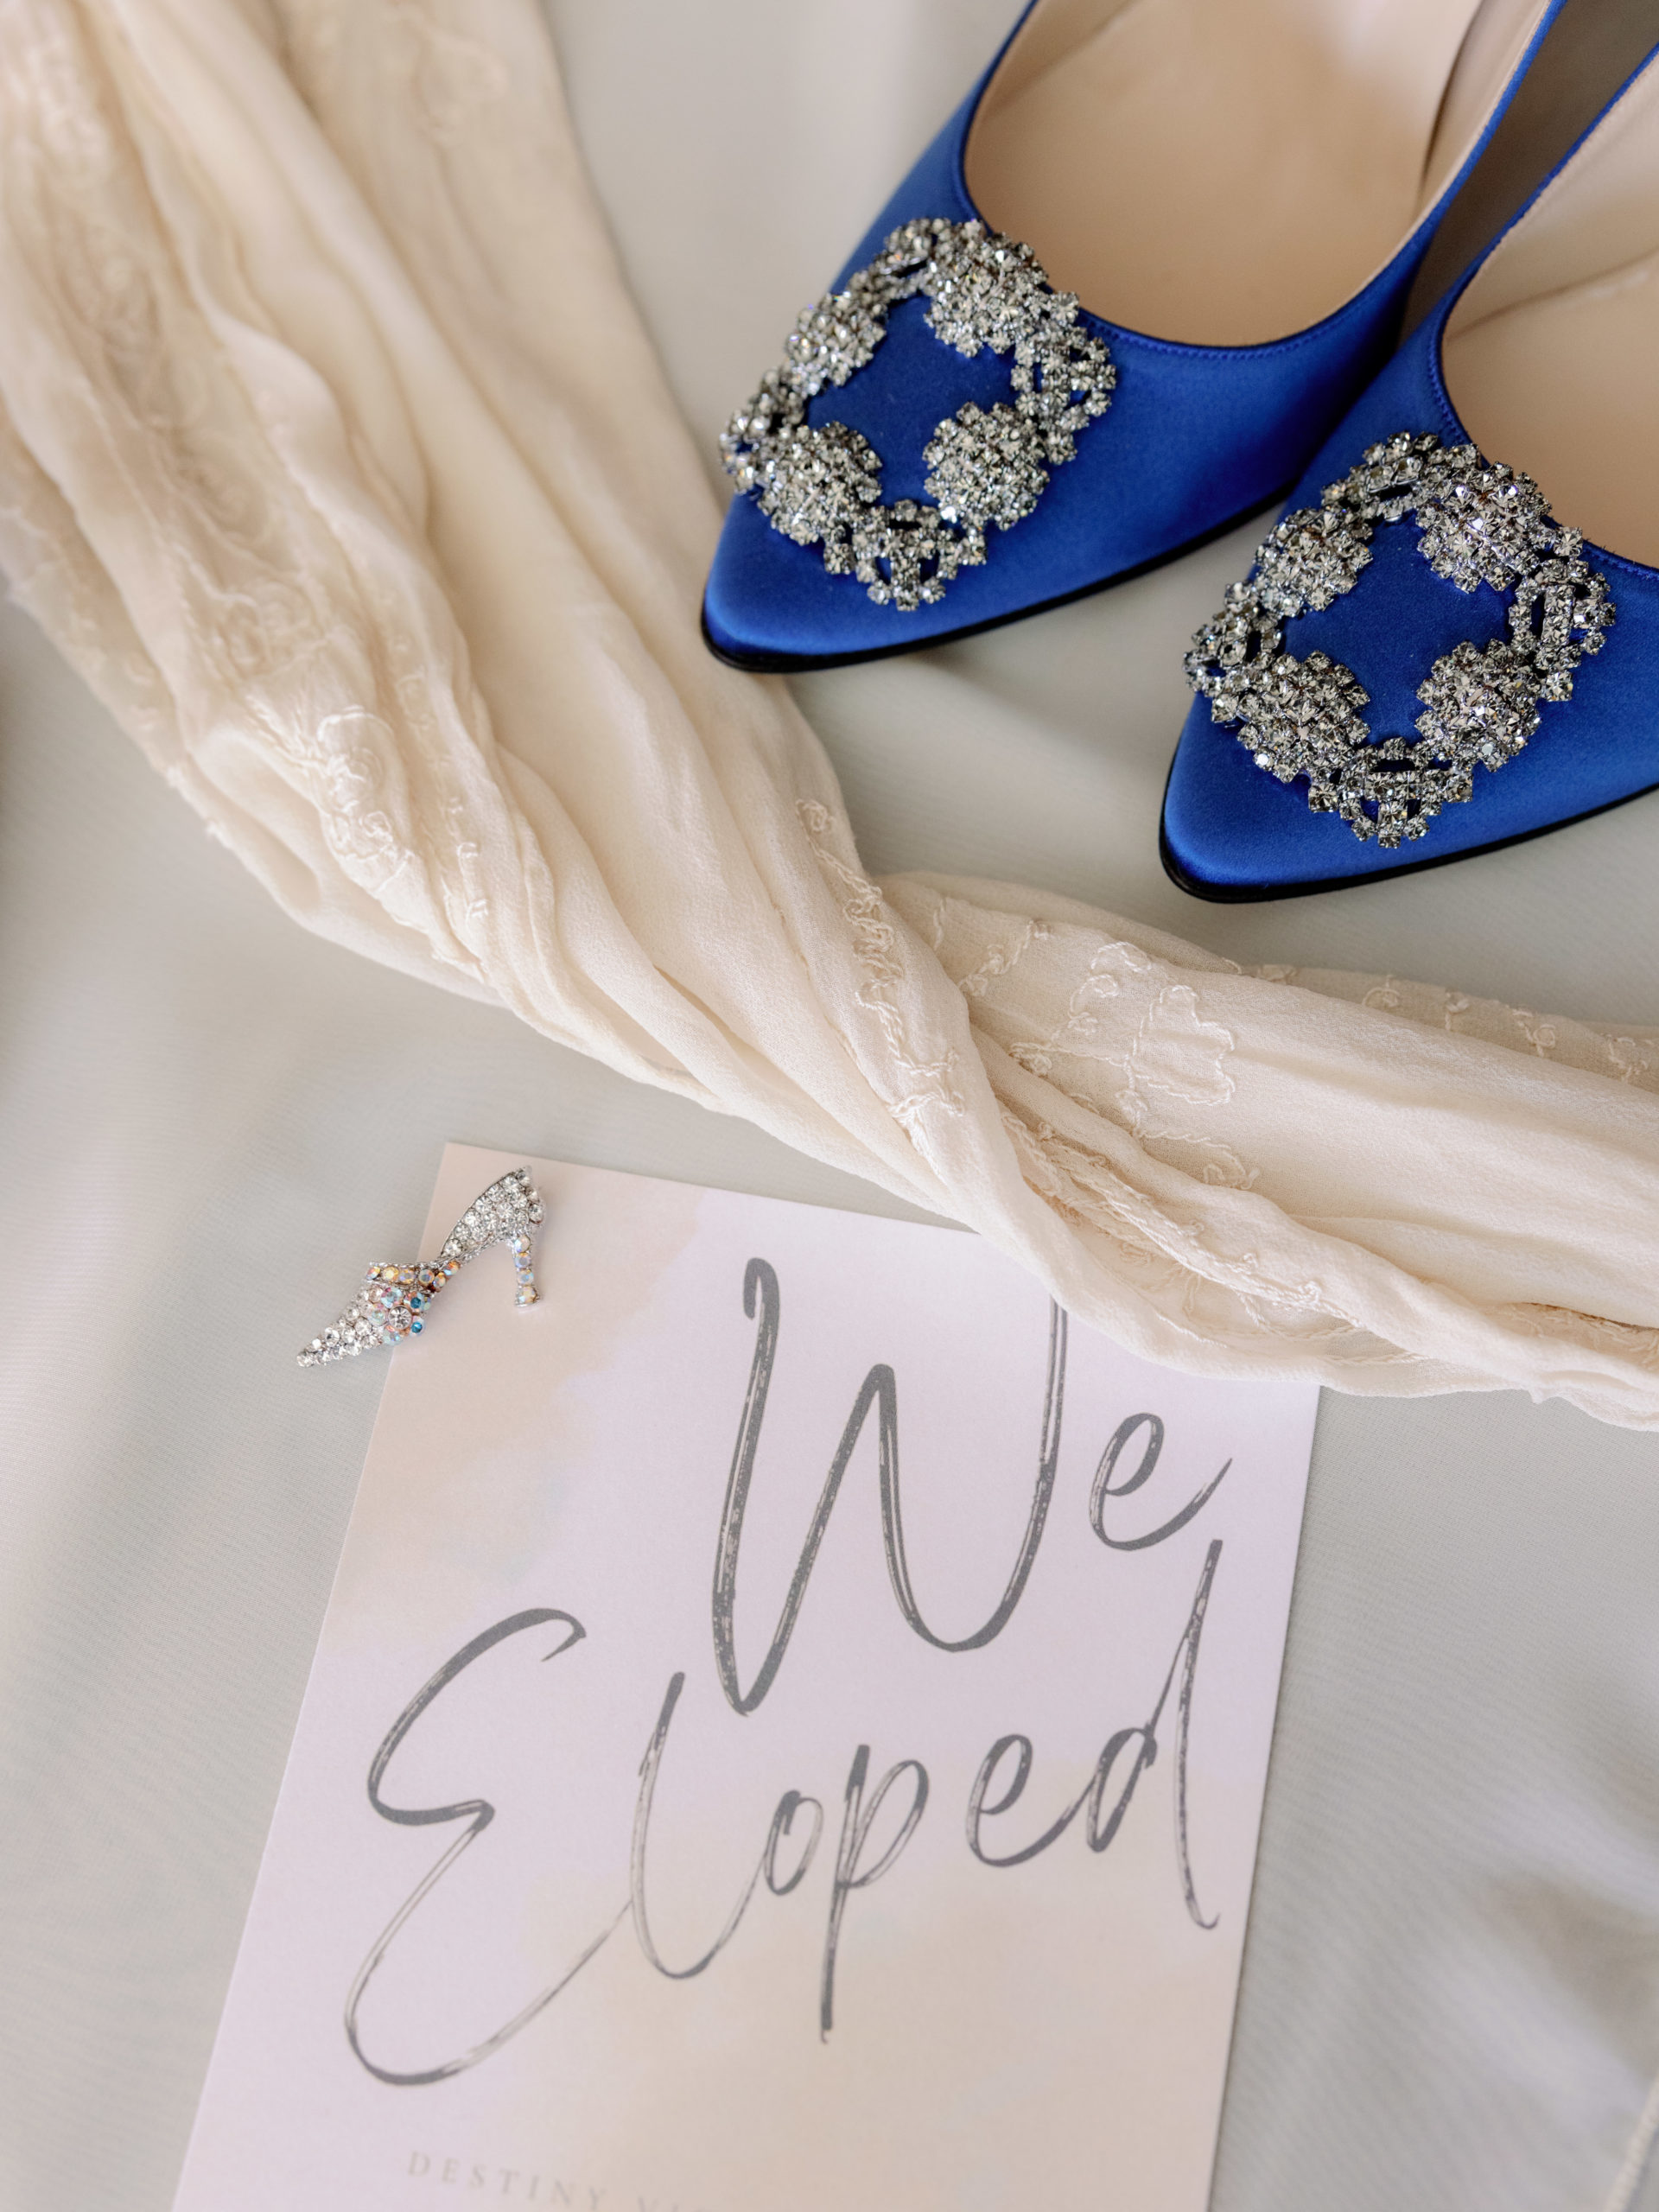 The bride's shoes with a paper that read "We Eloped". Eloping in NYC image by Jenny Fu Studio